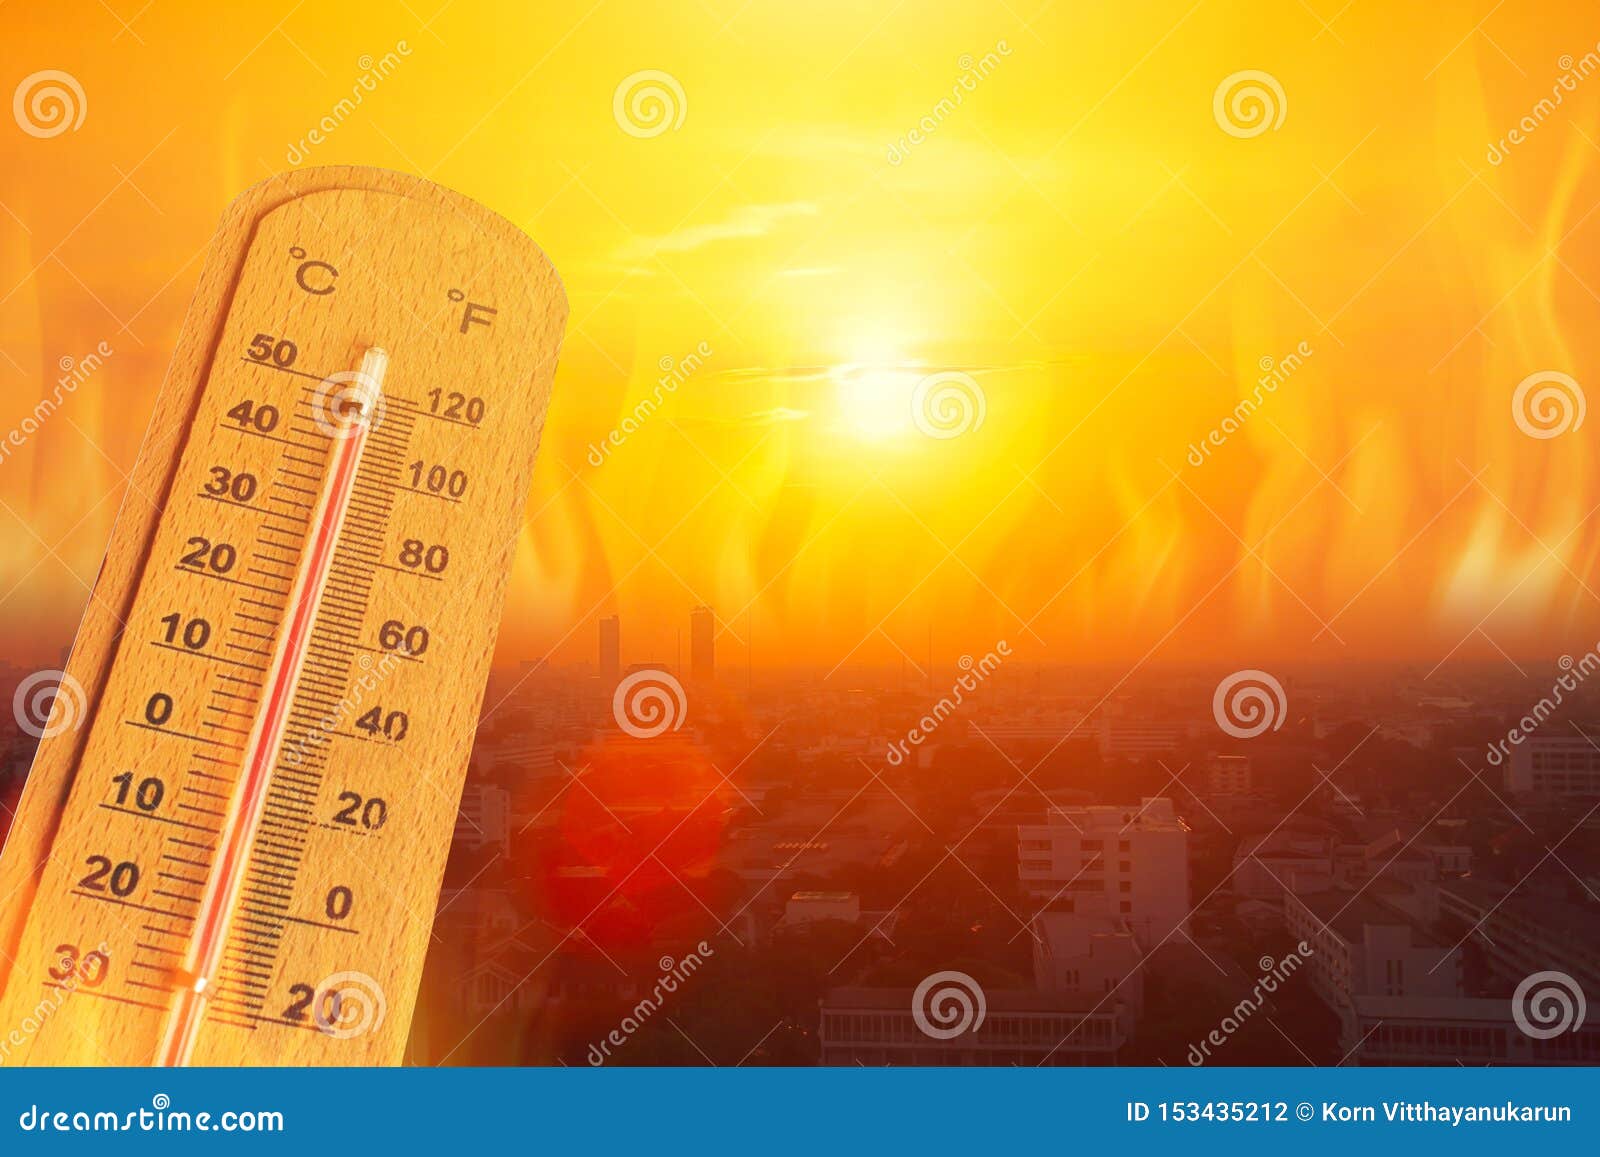 global warming high temperature city heat wave in summer season concept